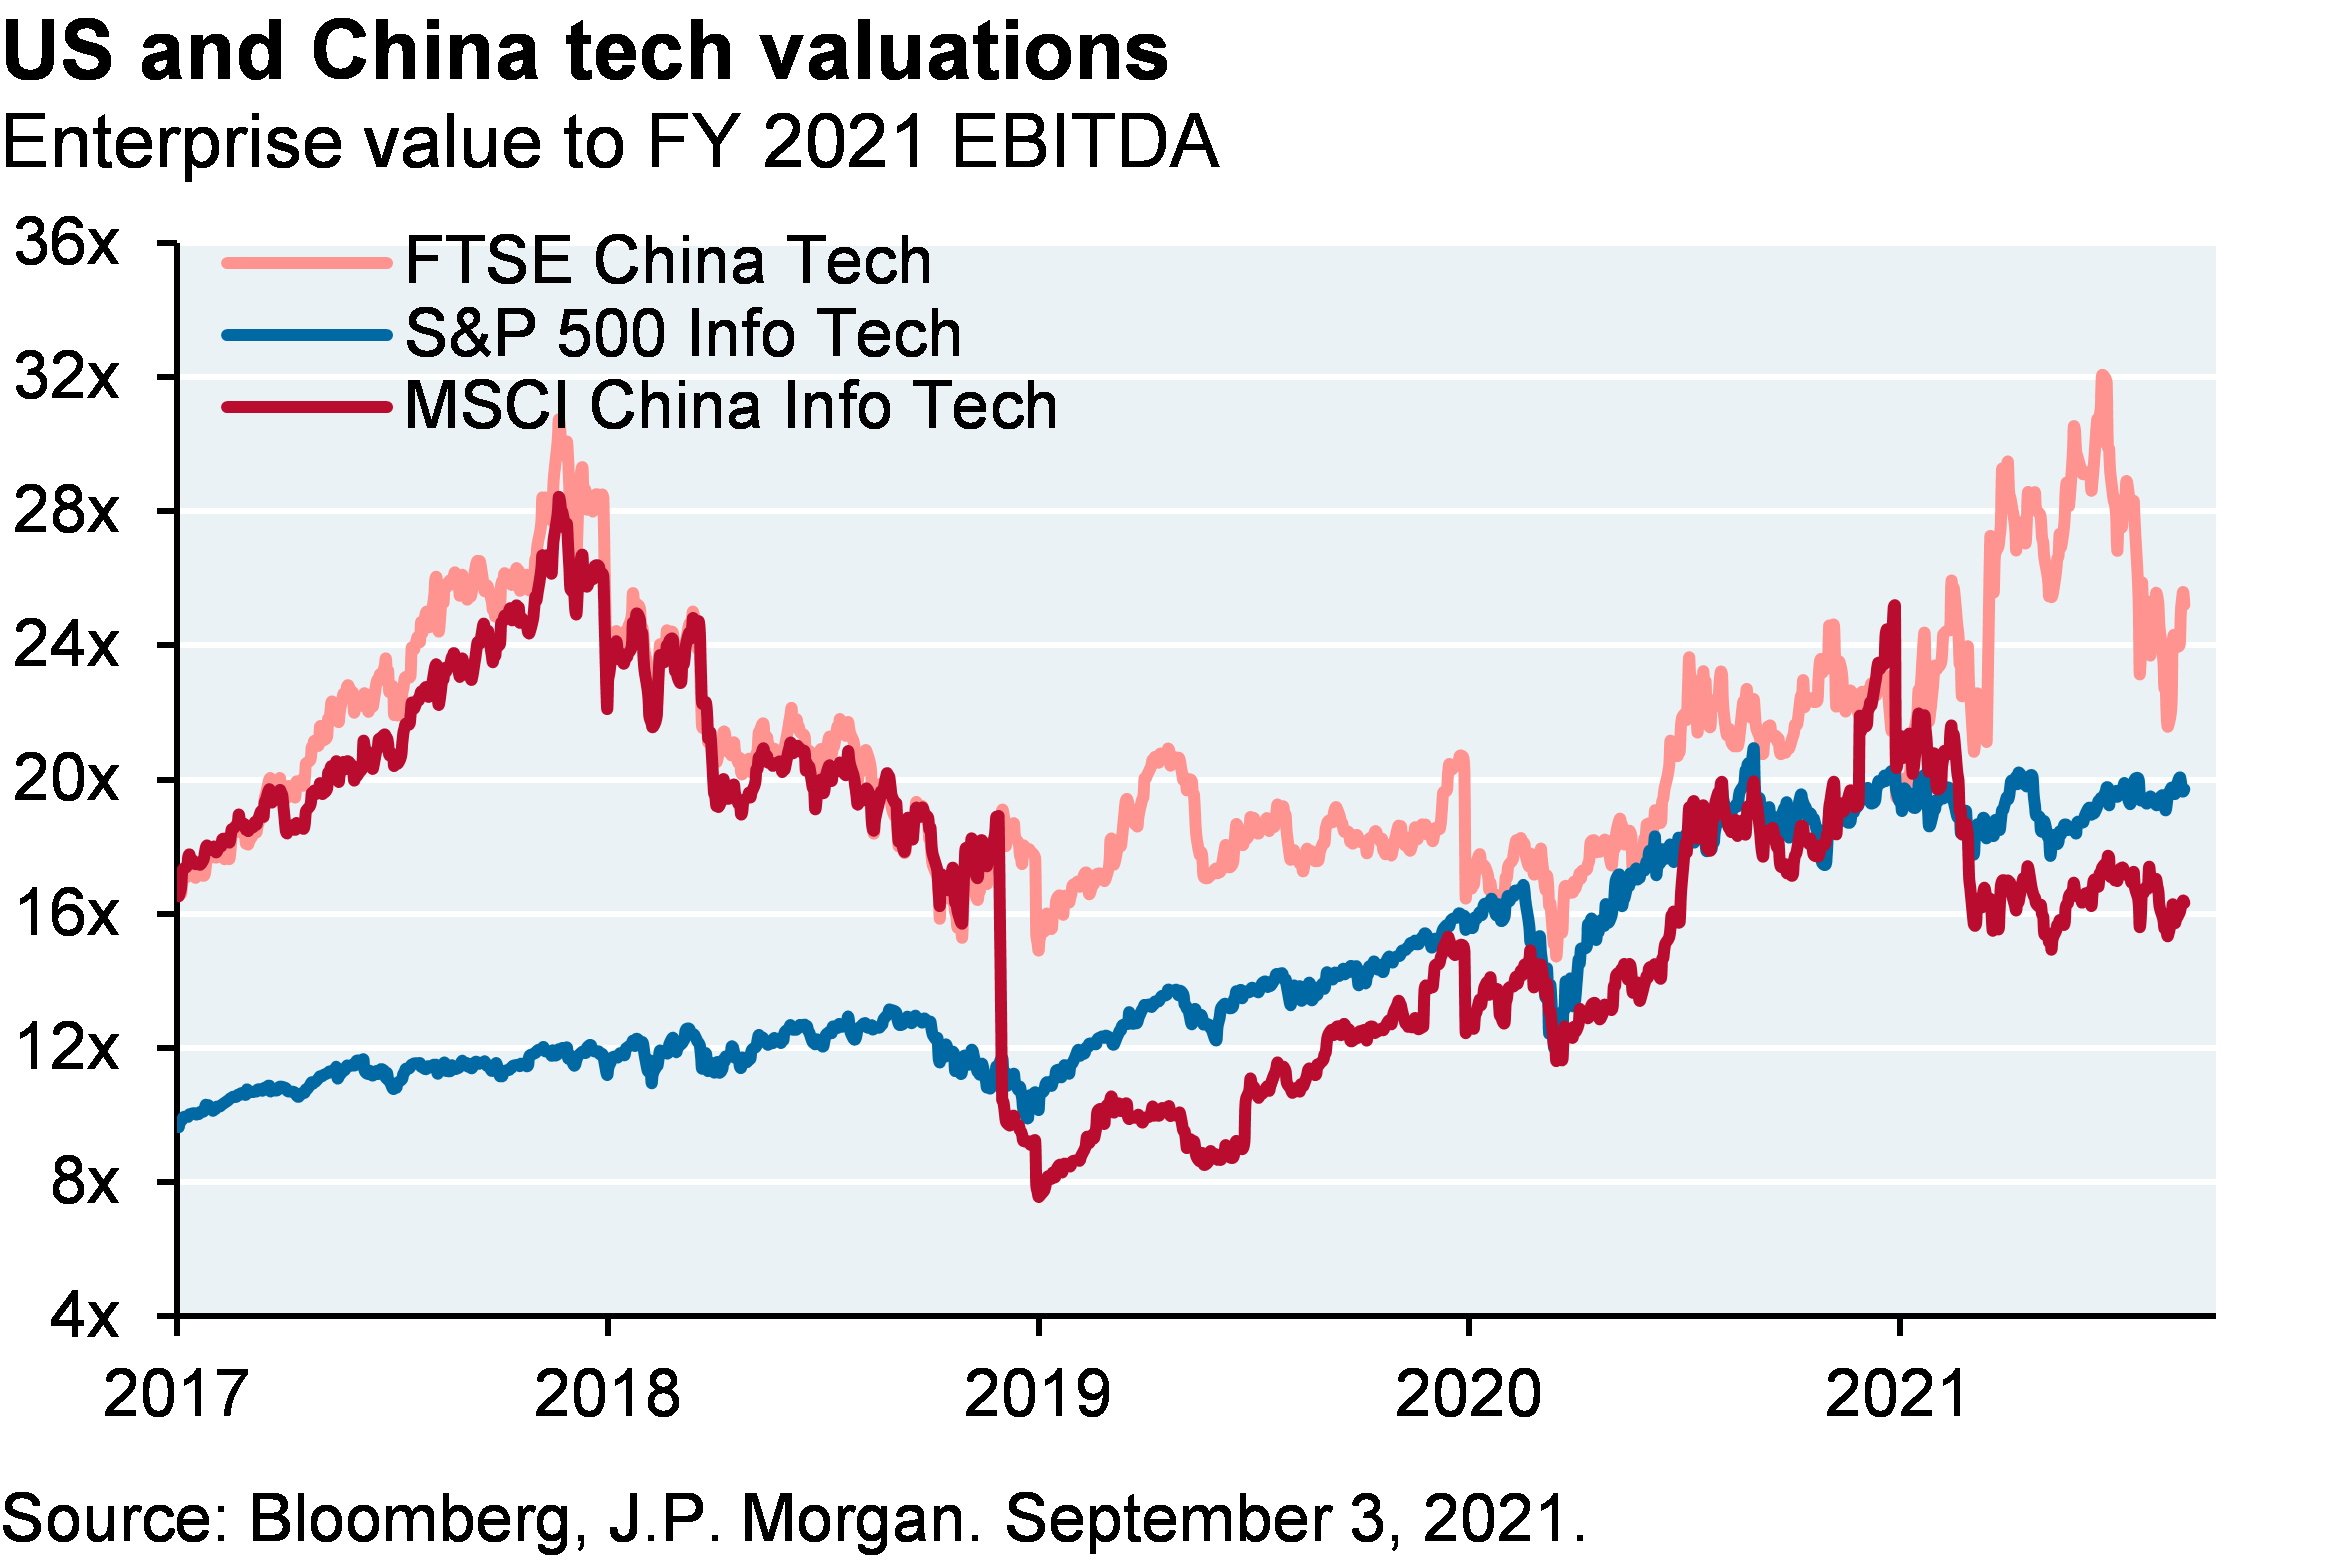 Line chart shows enterprise value to 2021 EBITDA for FTSE China Tech, MSCI China Info Tech and S&P 500 Info Tech. Despite the selloff in Chinese equities, China and US tech valuations are still similar.